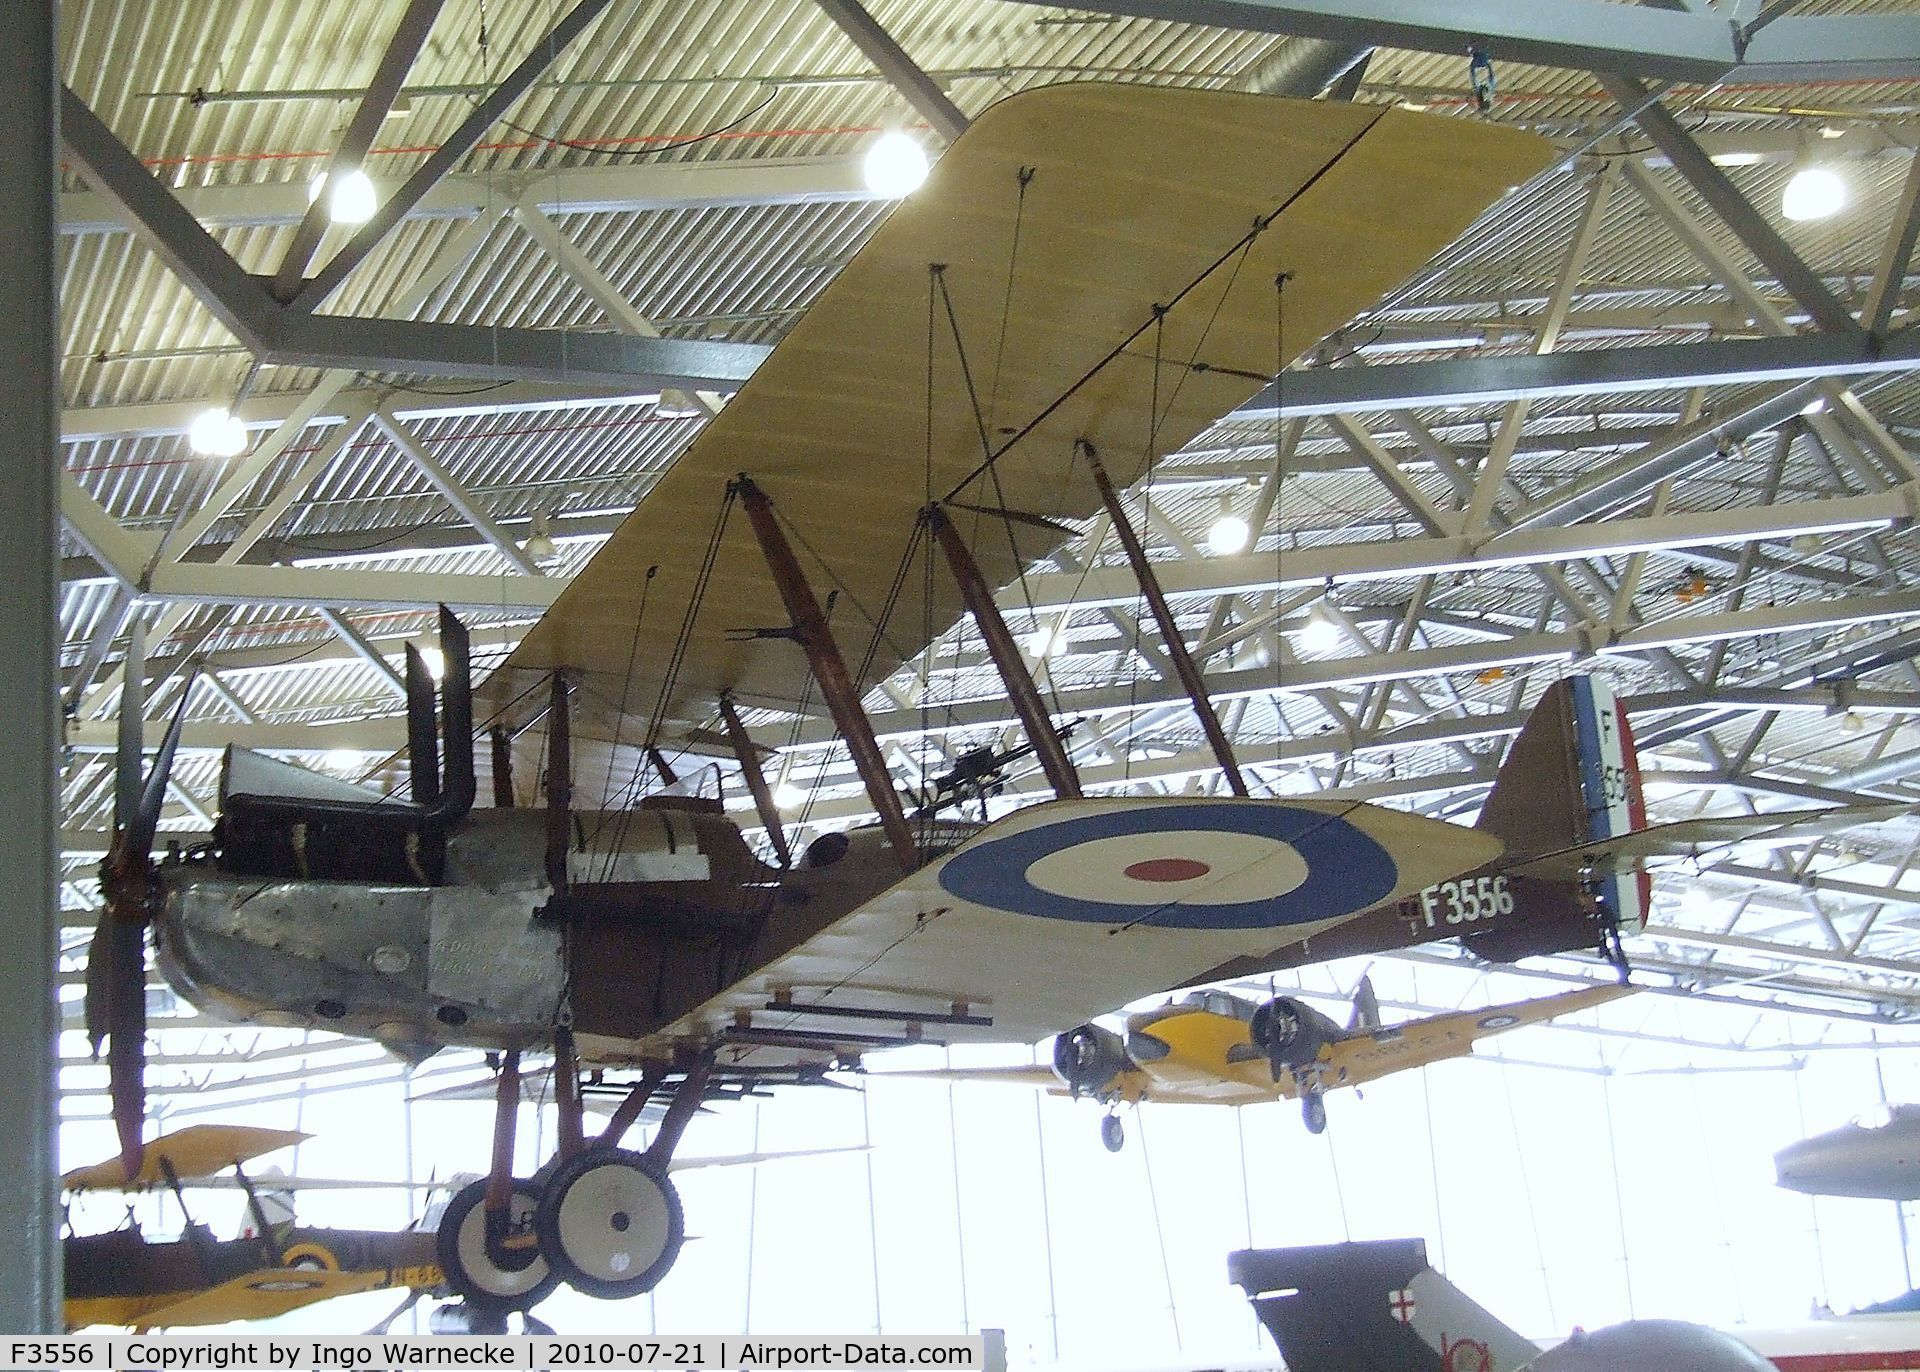 F3556, 1918 Royal Aircraft Factory RE-8 C/N Not found F3556, Royal Aircraft Factory R.E.8 at the Imperial War Museum, Duxford